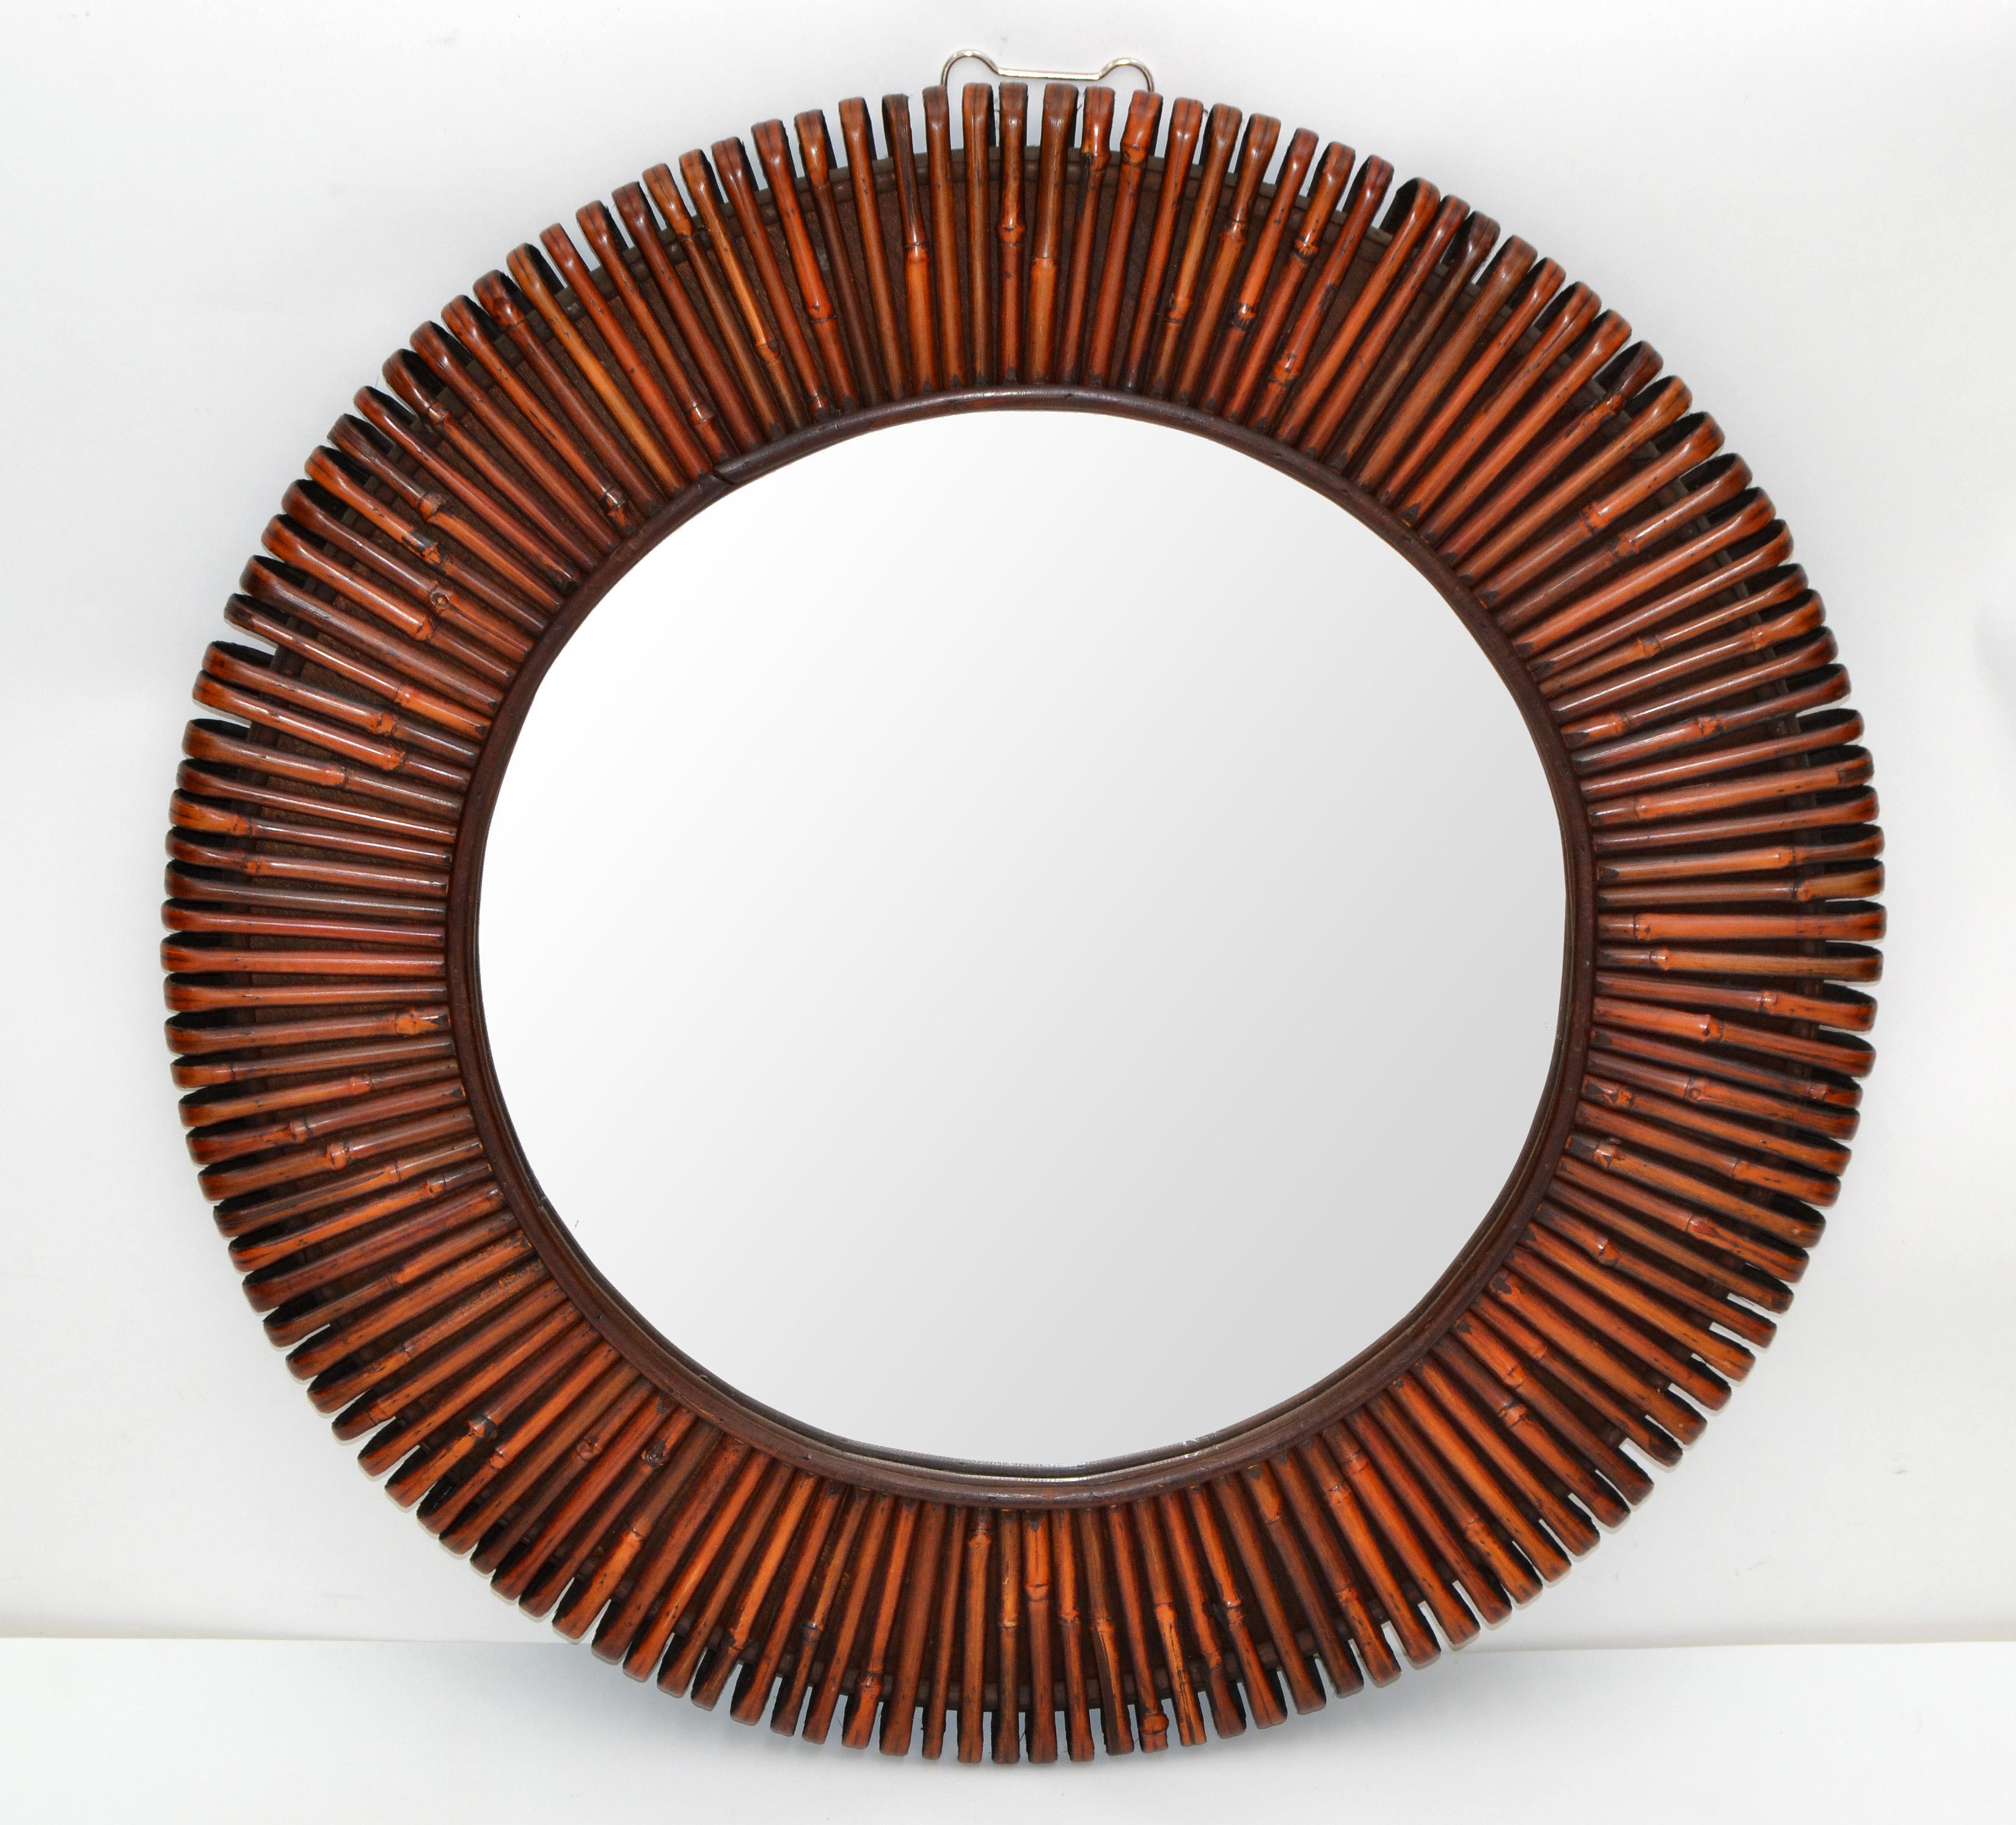 Contemporary Handcrafted Round Bent Rattan and Wood Mirror 2